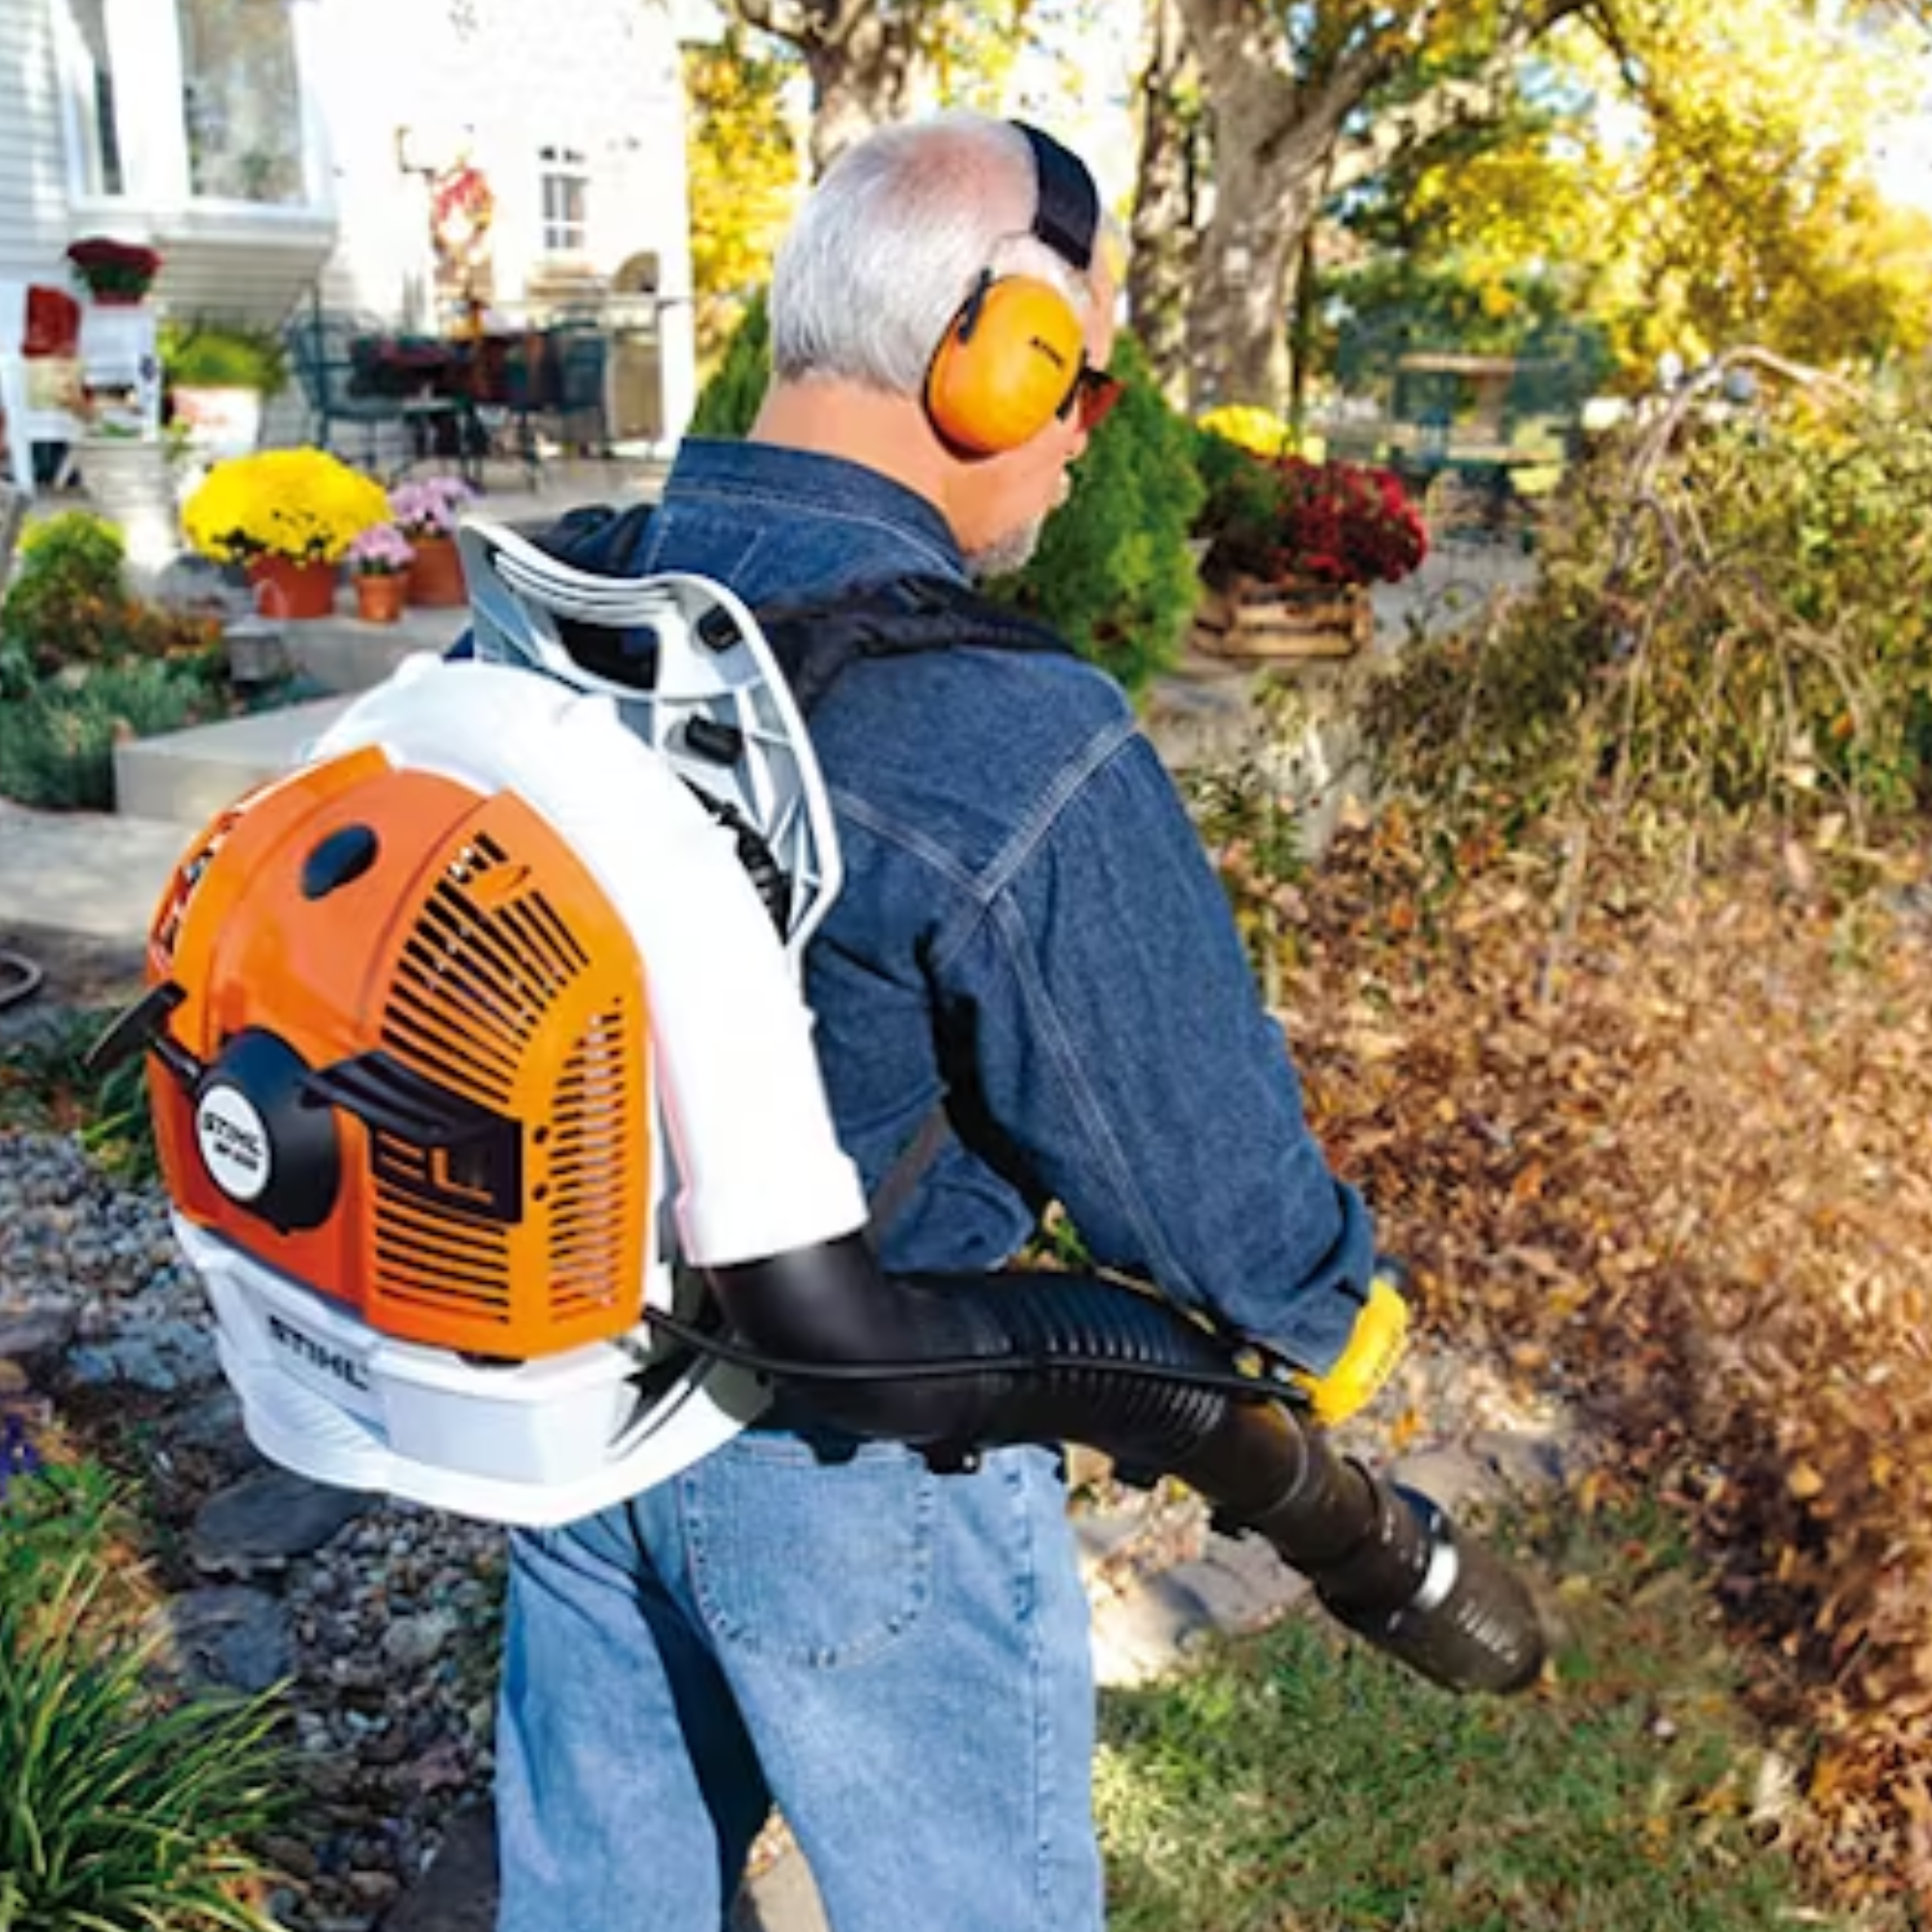 Stihl BR 500 Quiet Gas Powered Backpack Blower